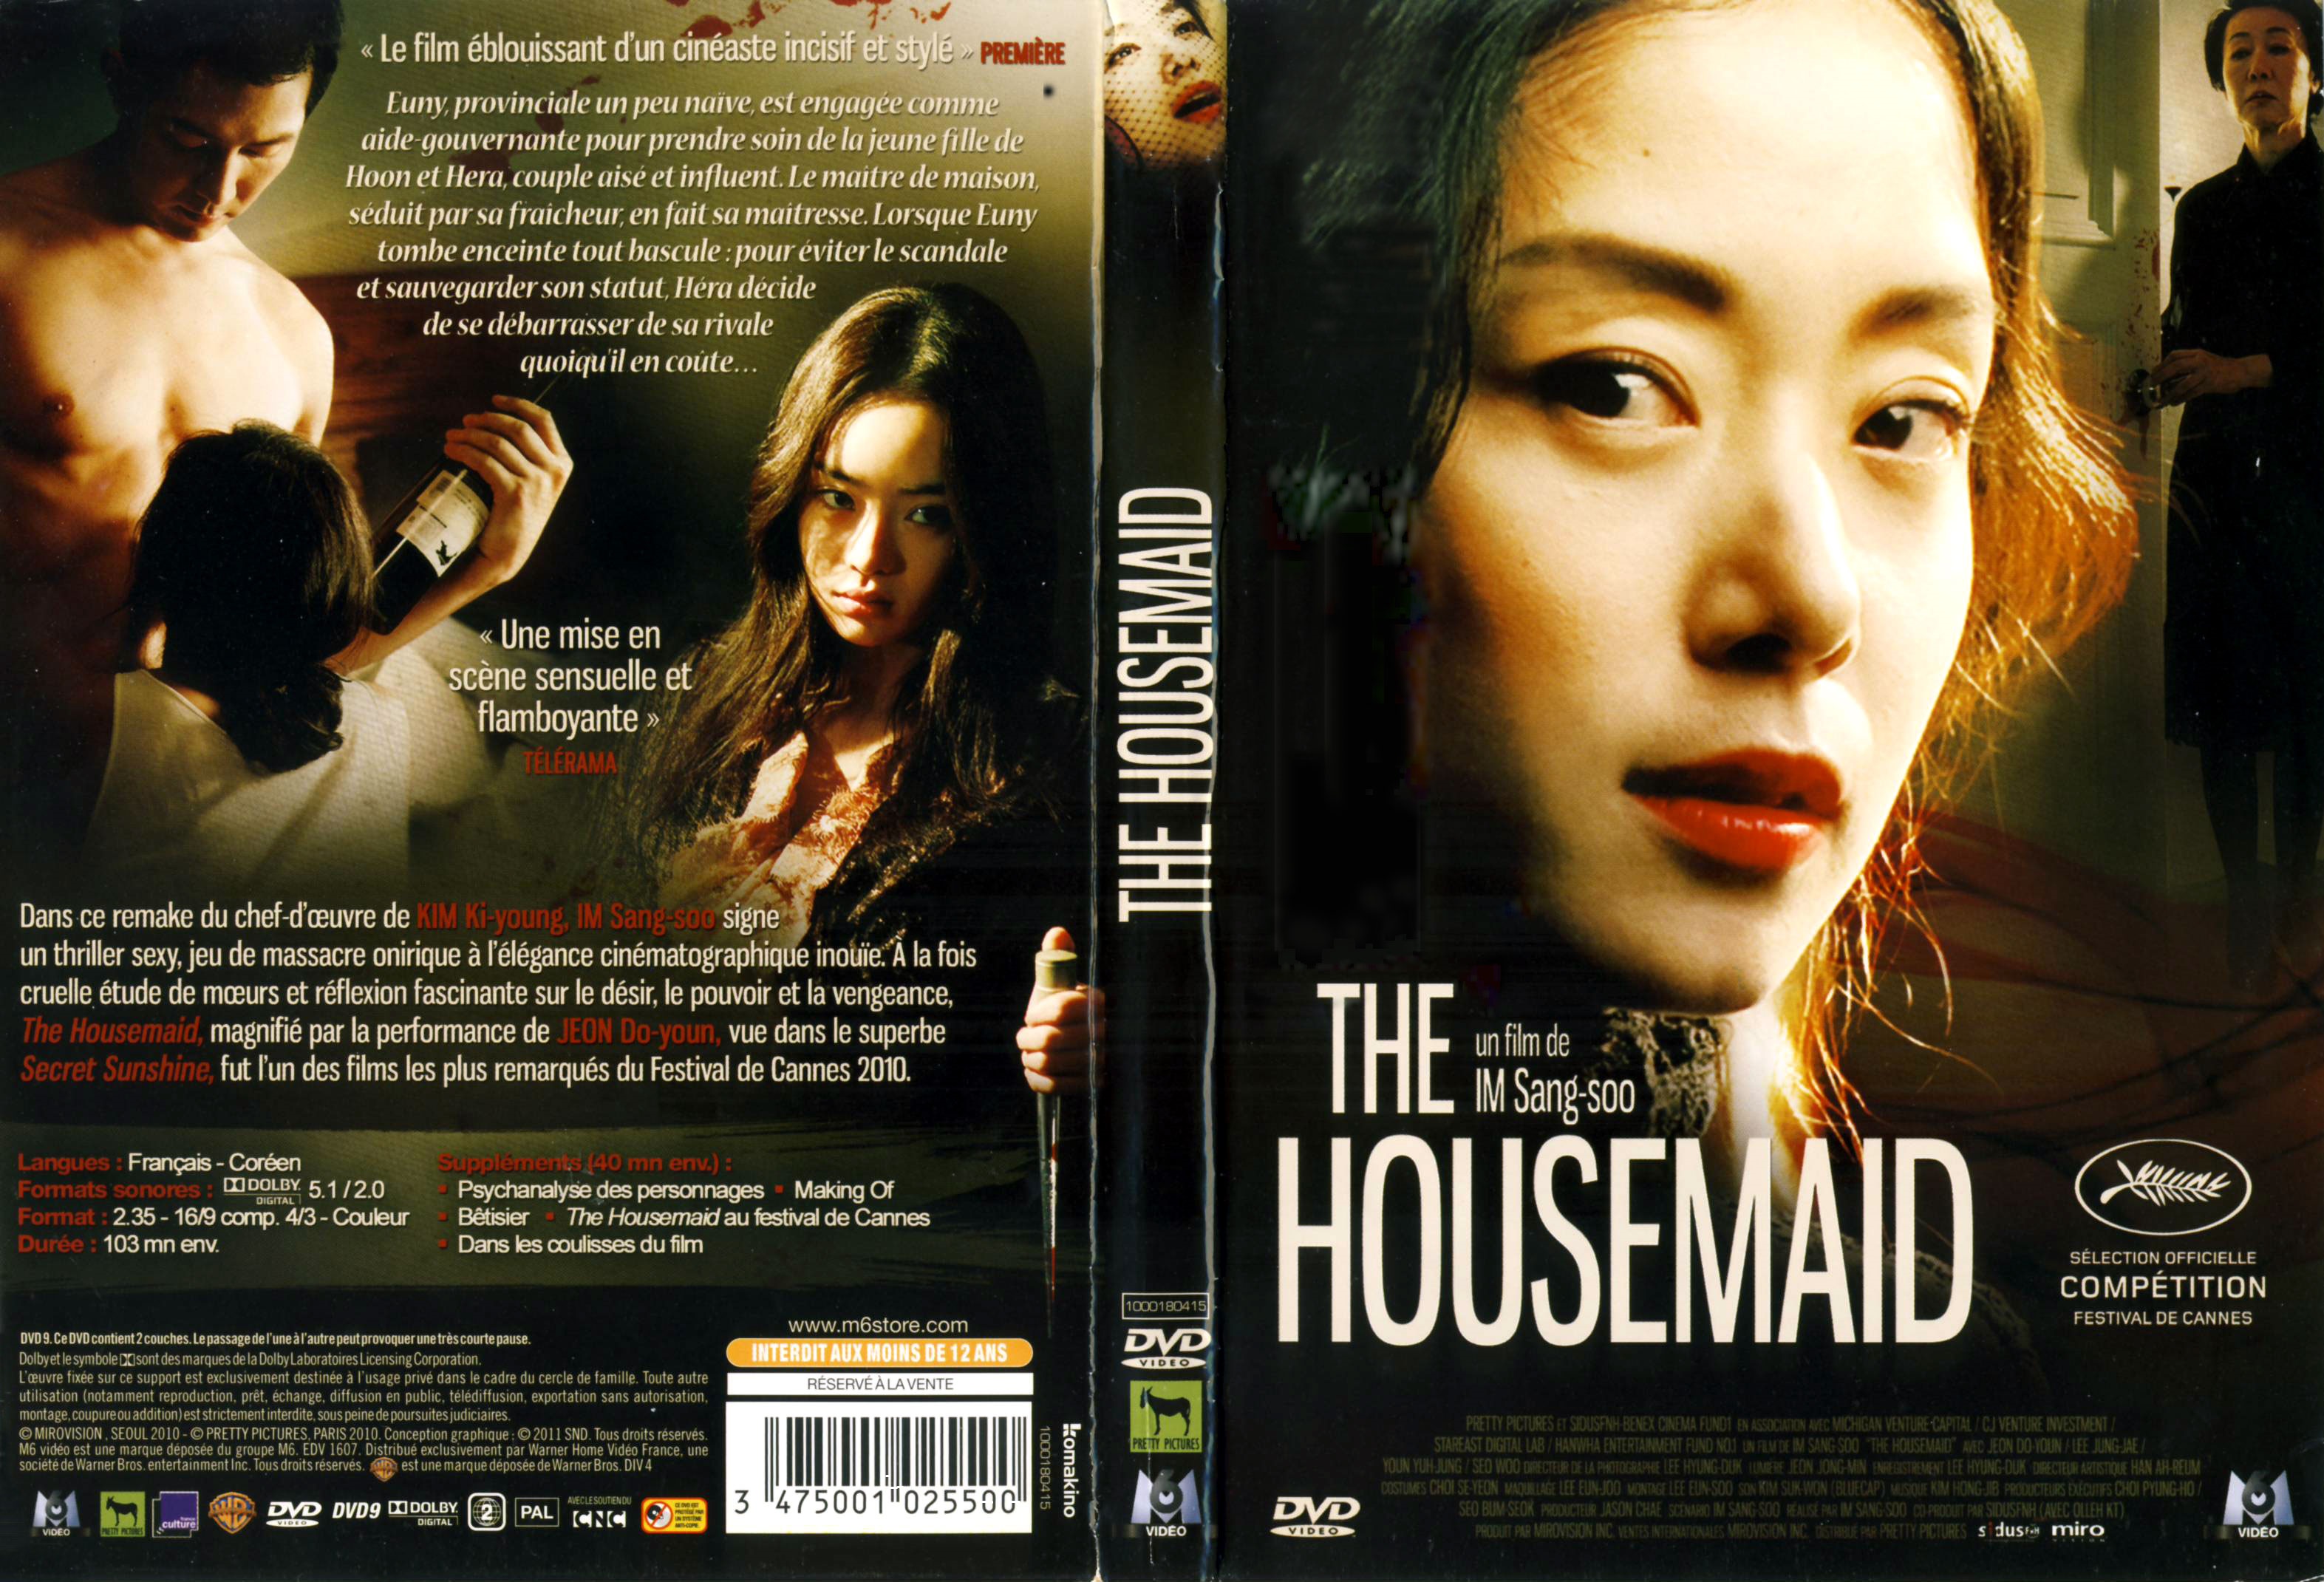 Jaquette DVD The Housemaid